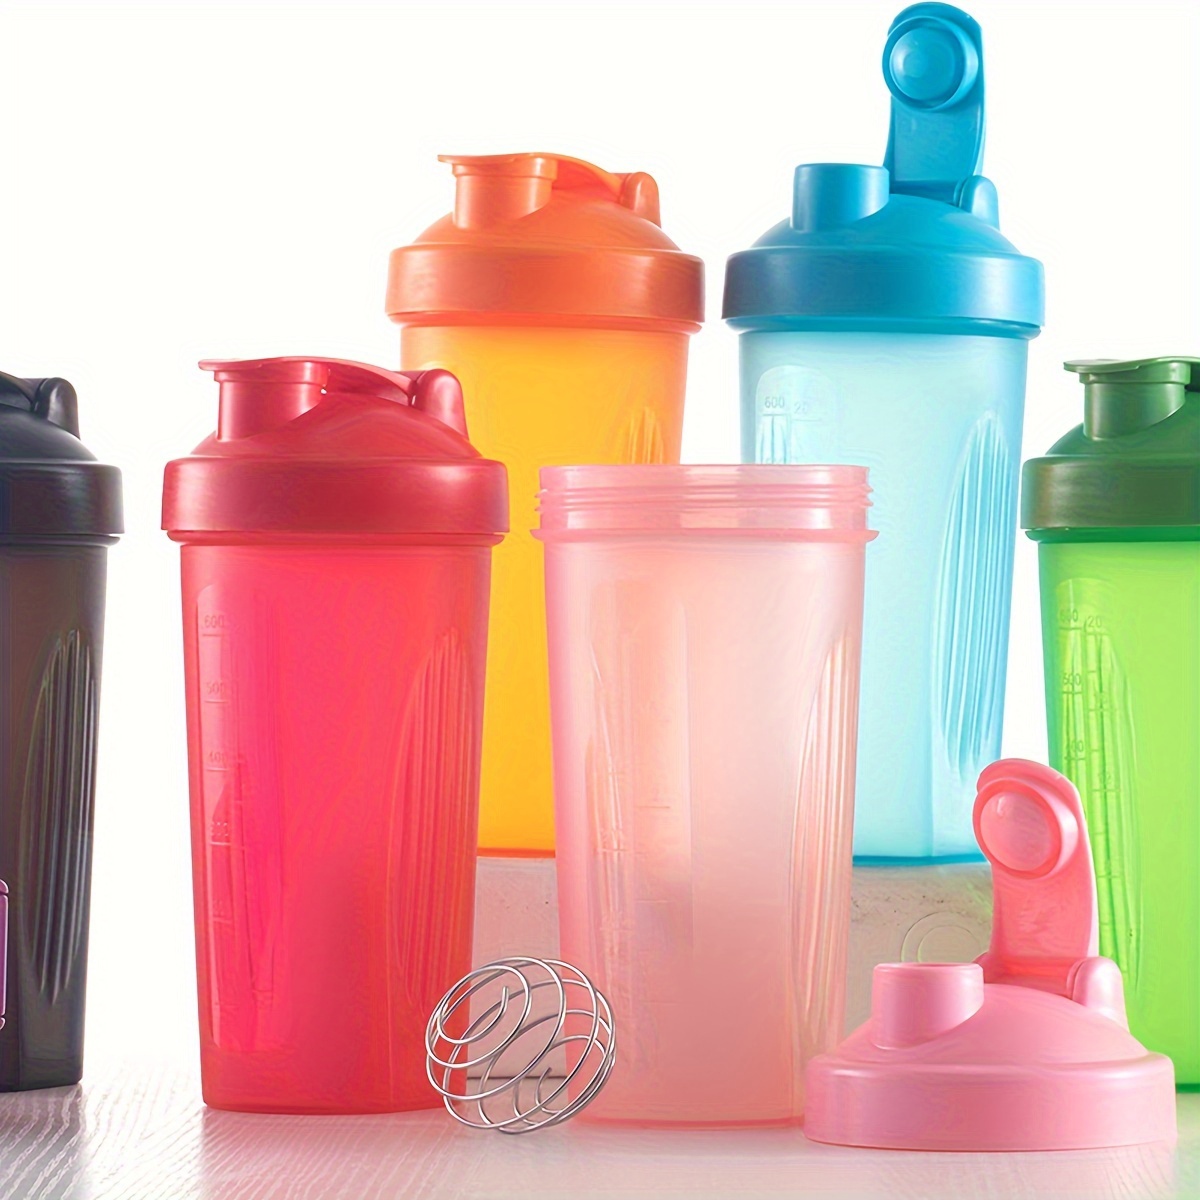 DYTTDG Plastic 500ml Shaker Bottle,Shaker Bottle With Stirring Ball,Water  Cup For Fitness, Classic Protein Mixer Shaker Bottle Office Supplies